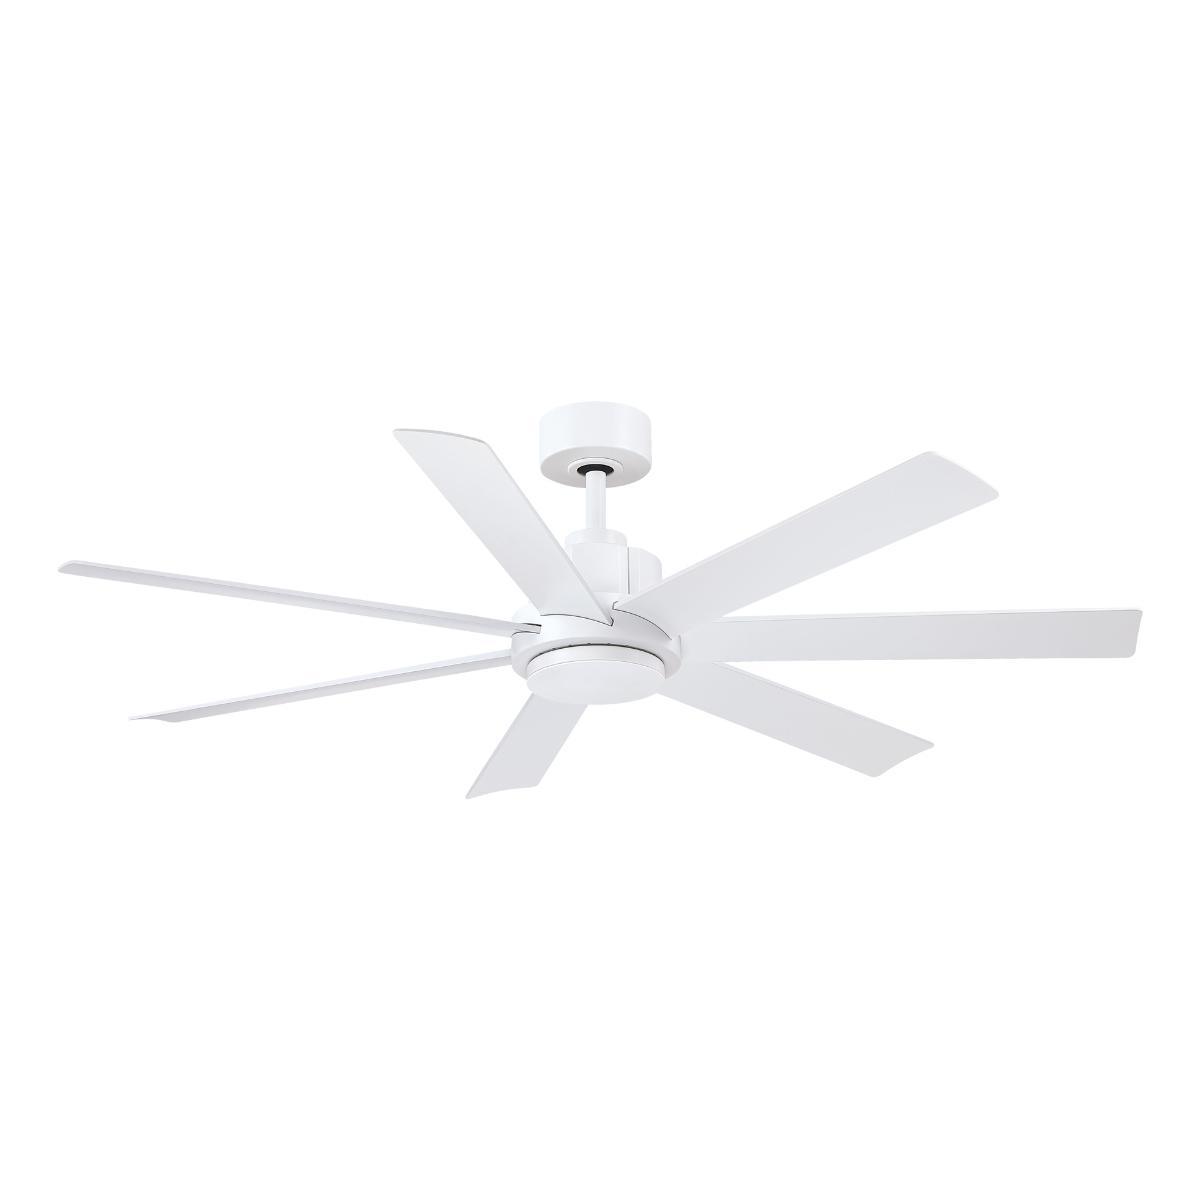 Pendry 56 inch Indoor/Outdoor Ceiling Fan with Remote, Matte White Finish - Bees Lighting